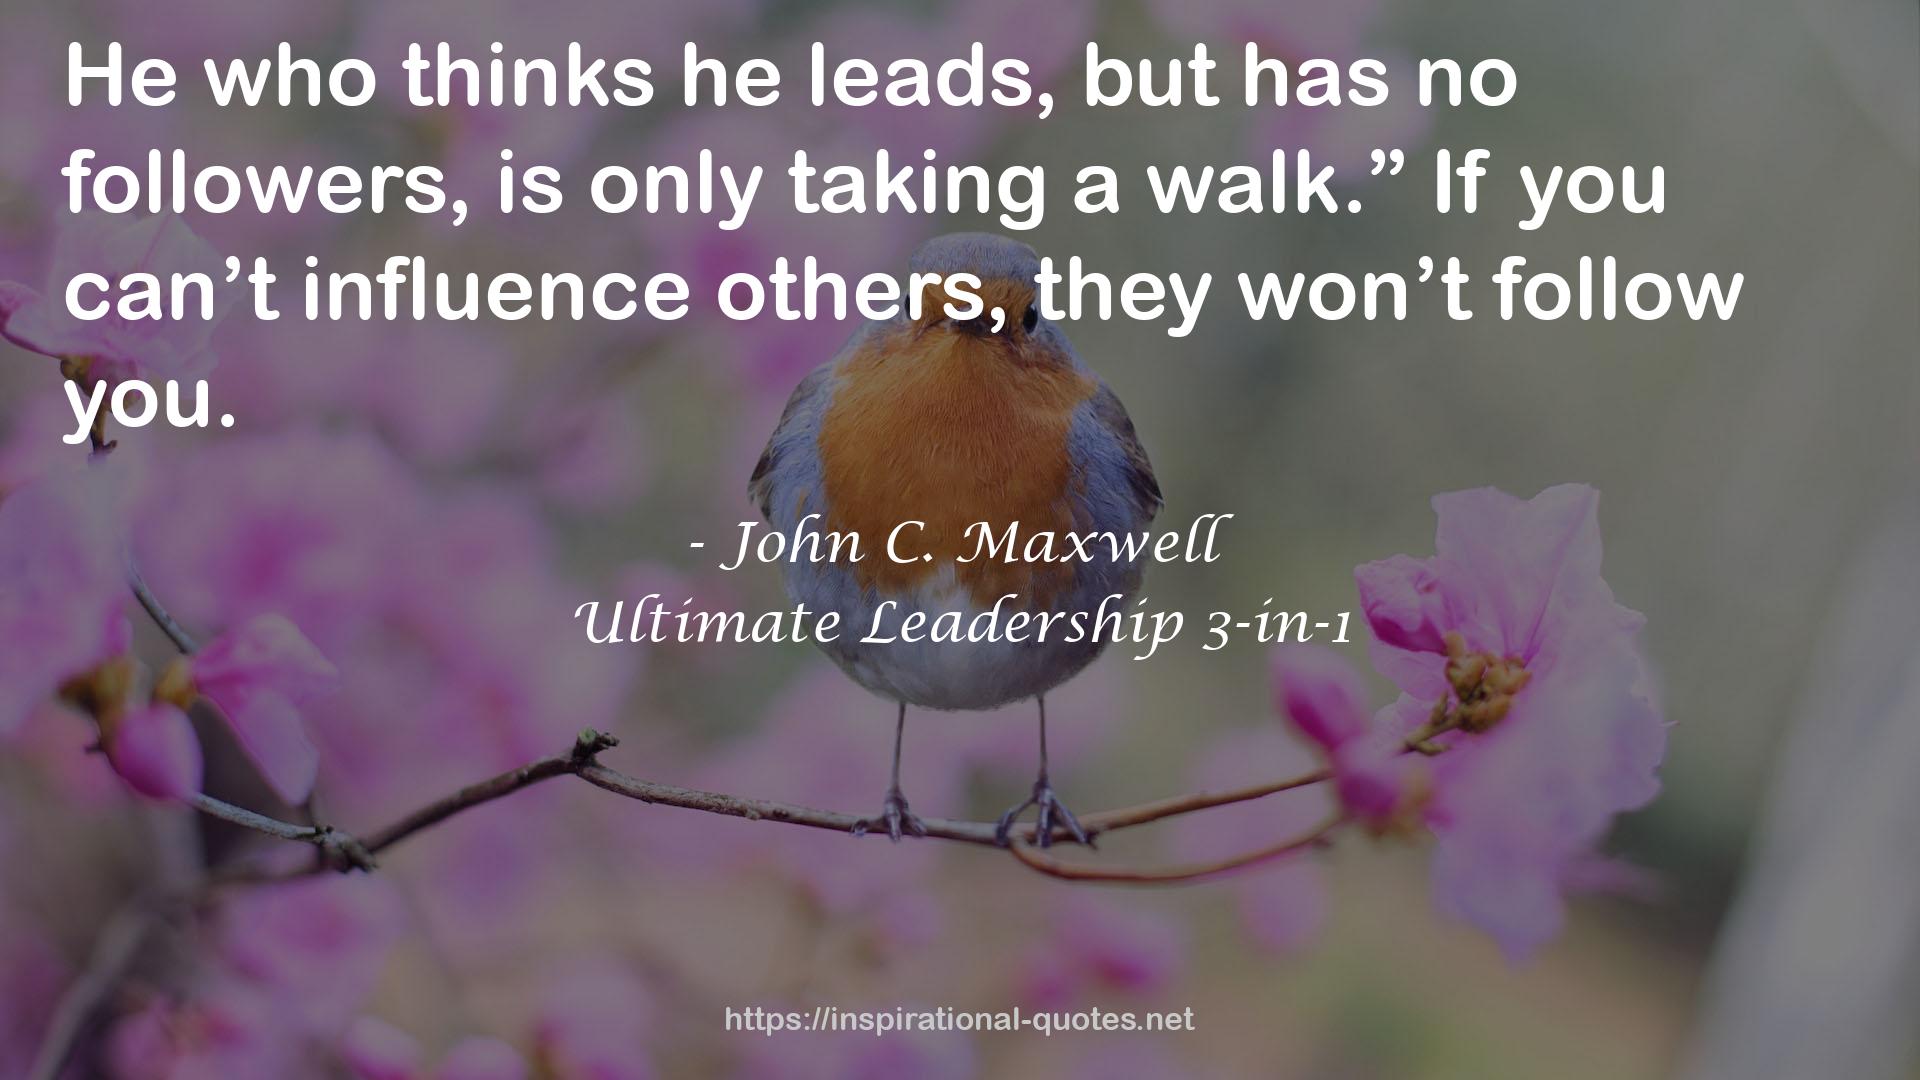 Ultimate Leadership 3-in-1 QUOTES